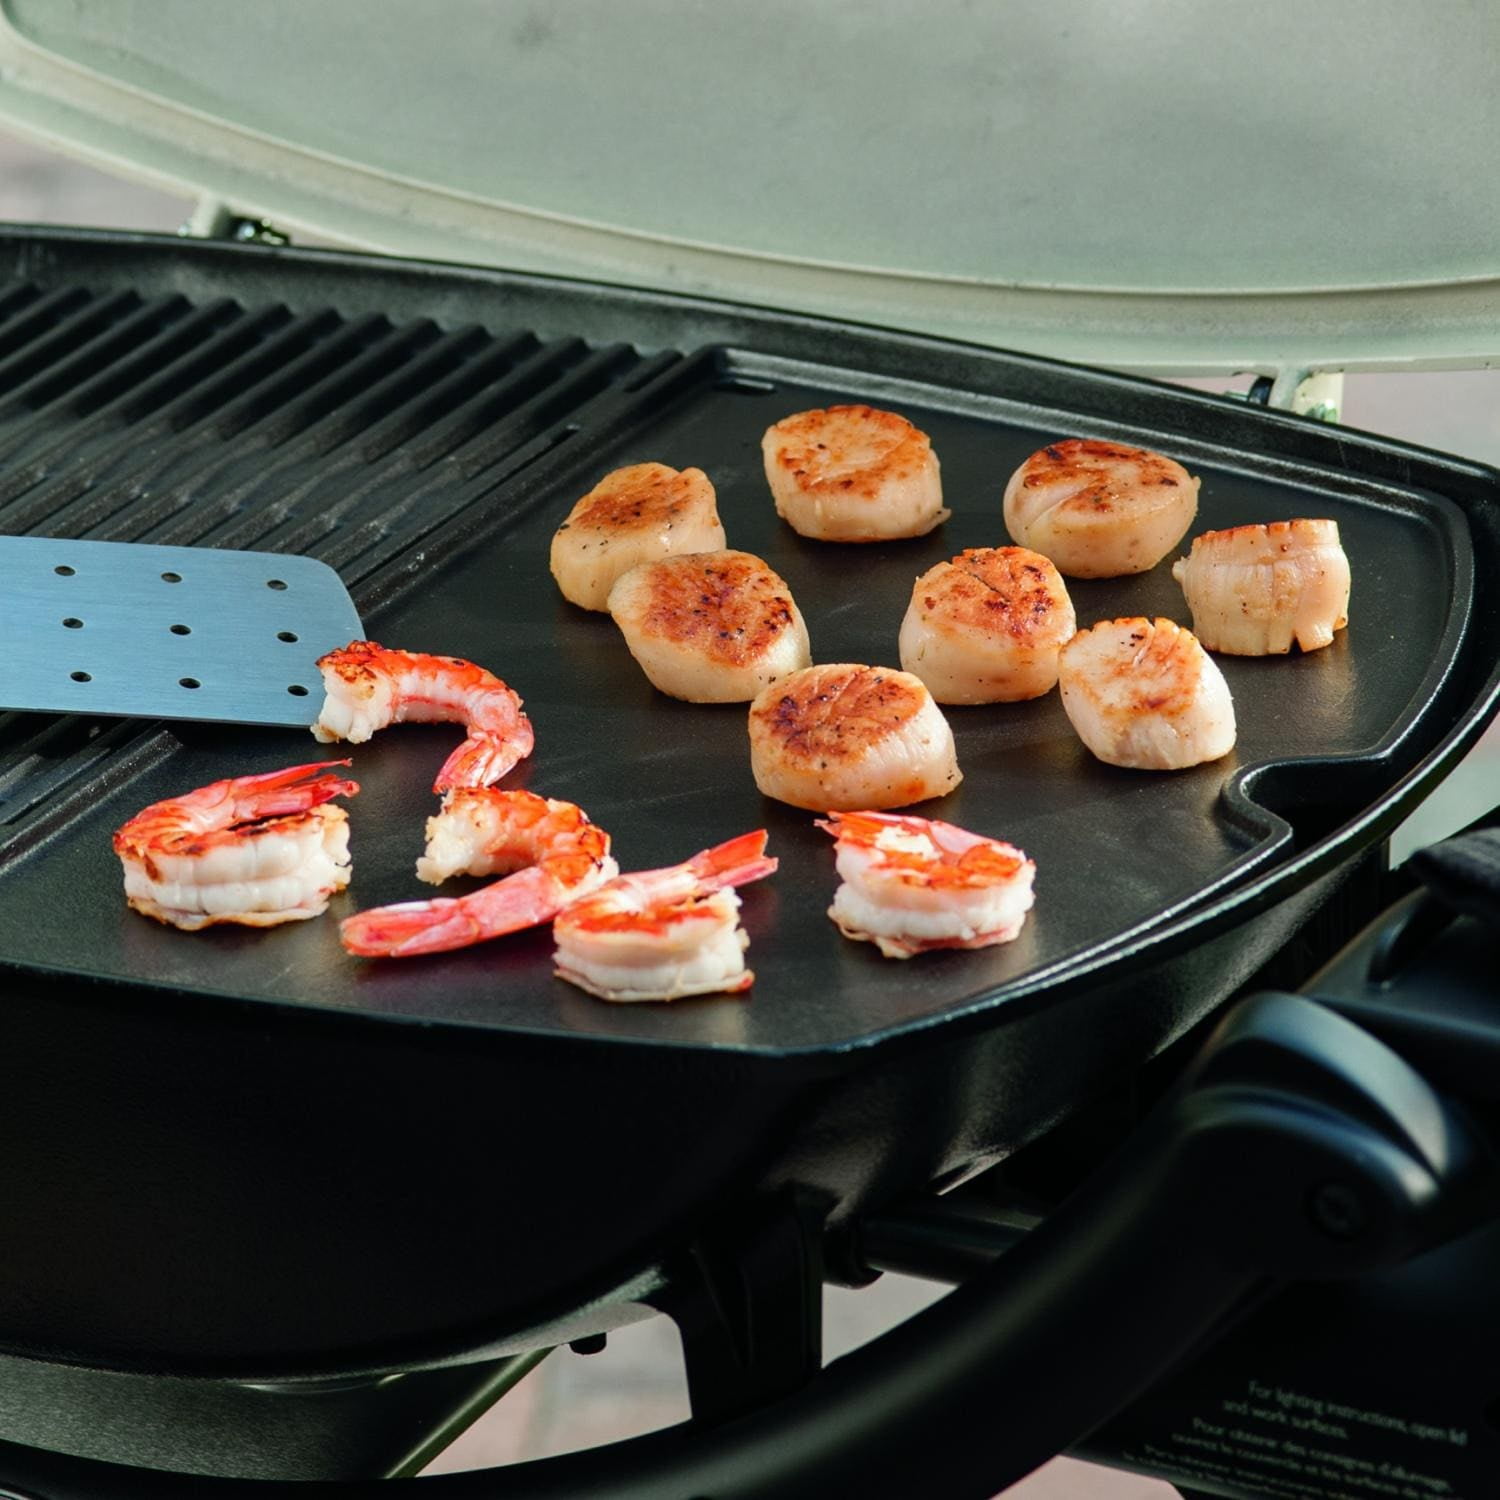 Nordic Ware 2-Burner Reversible Grill Griddle, 20 by 10-3/4 Inch 